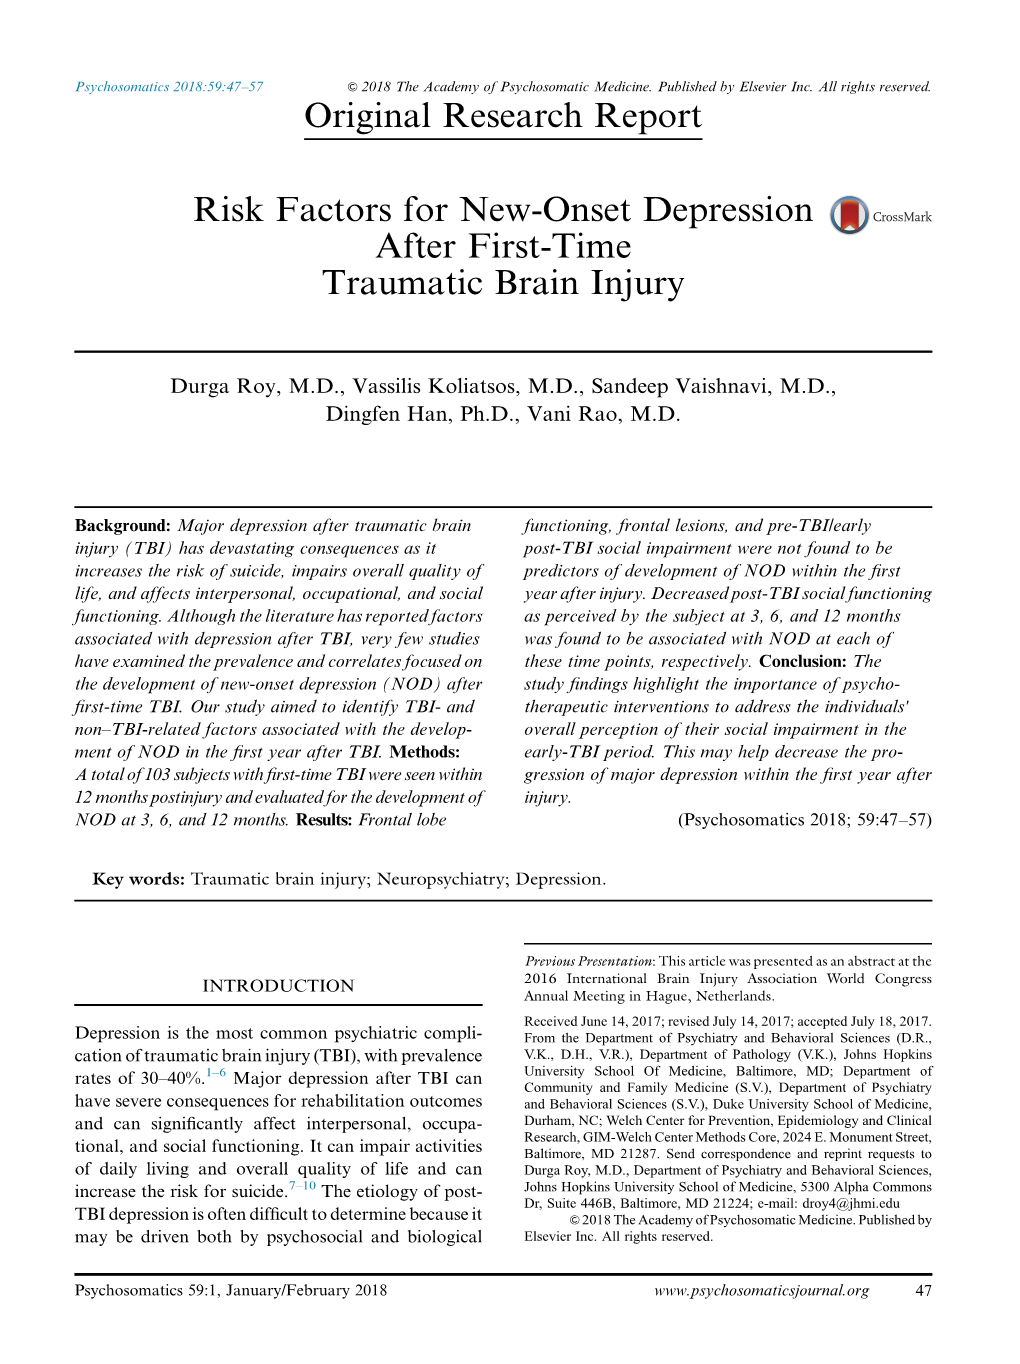 Risk Factors for New-Onset Depression After First-Time Traumatic Brain Injury